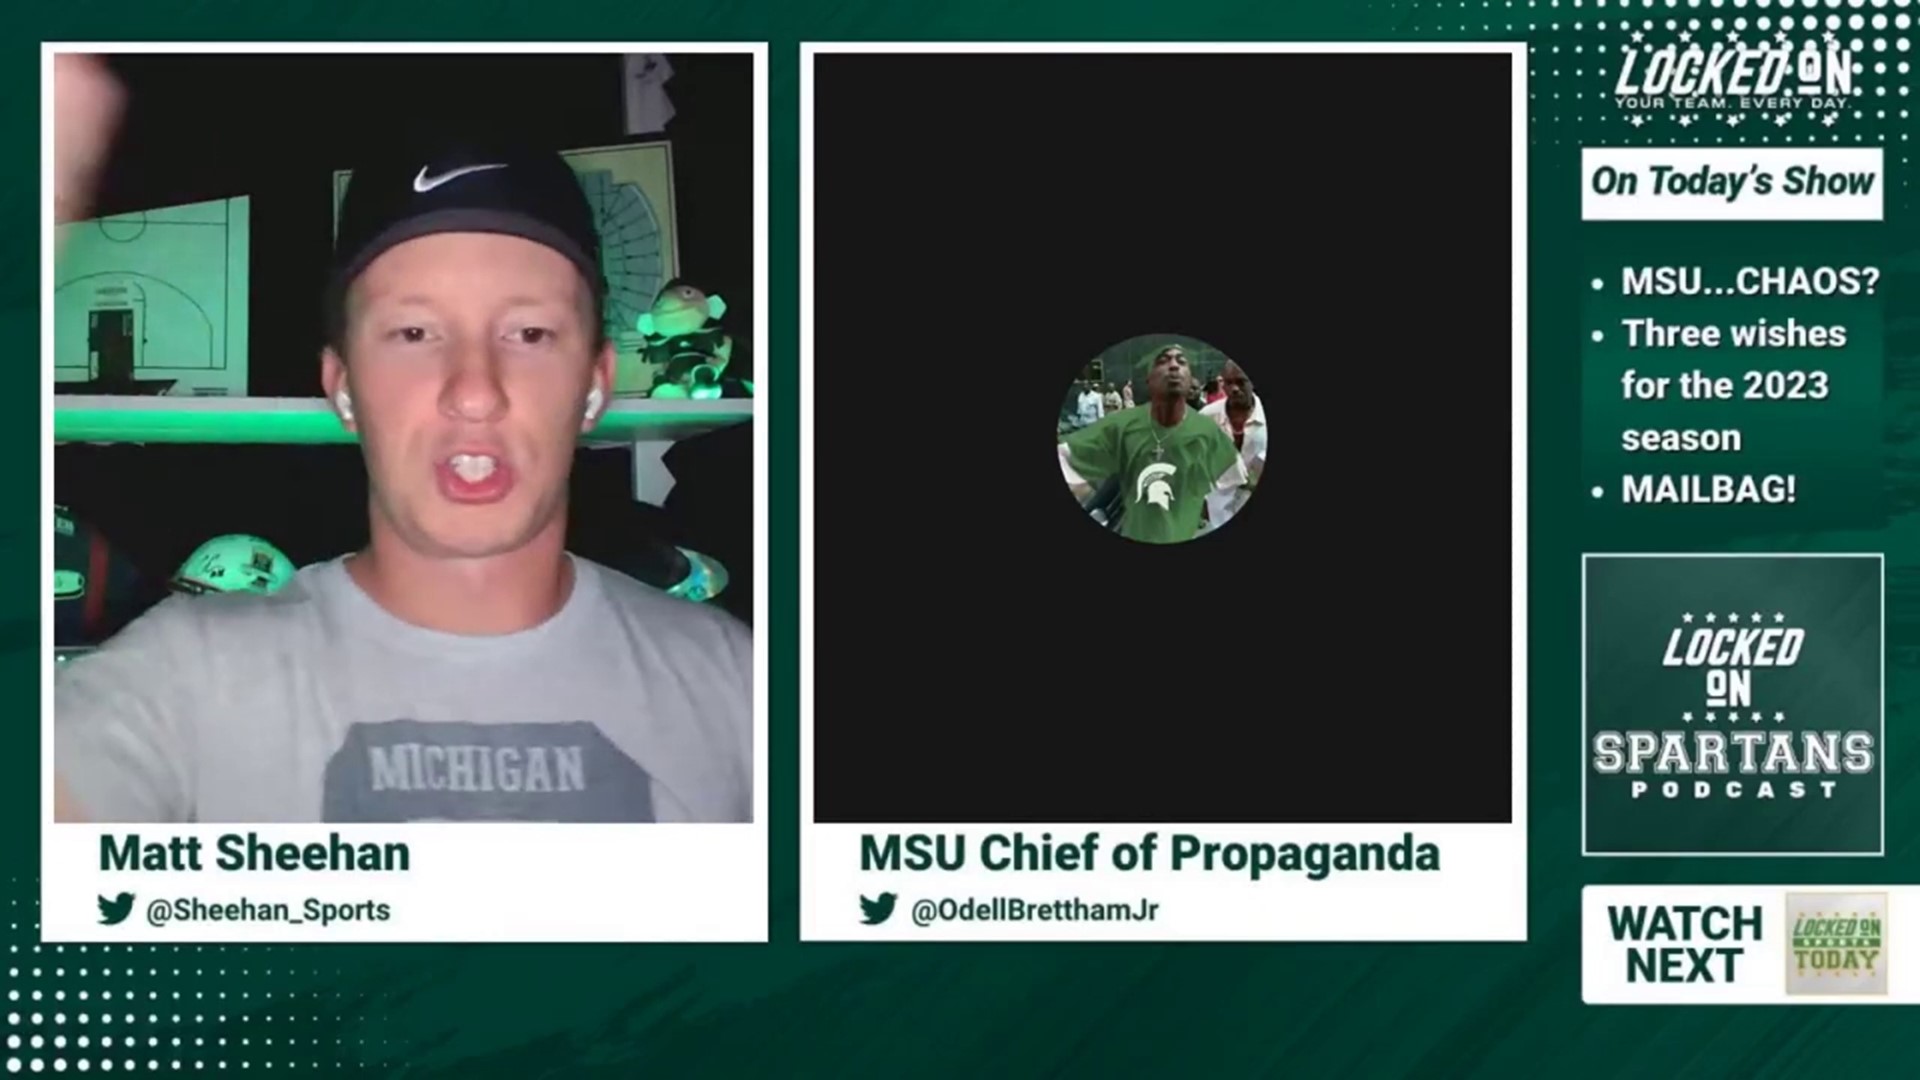 We chat Michigan State football who could be a CHAOS TEAM ahead of the 2023 college football season.